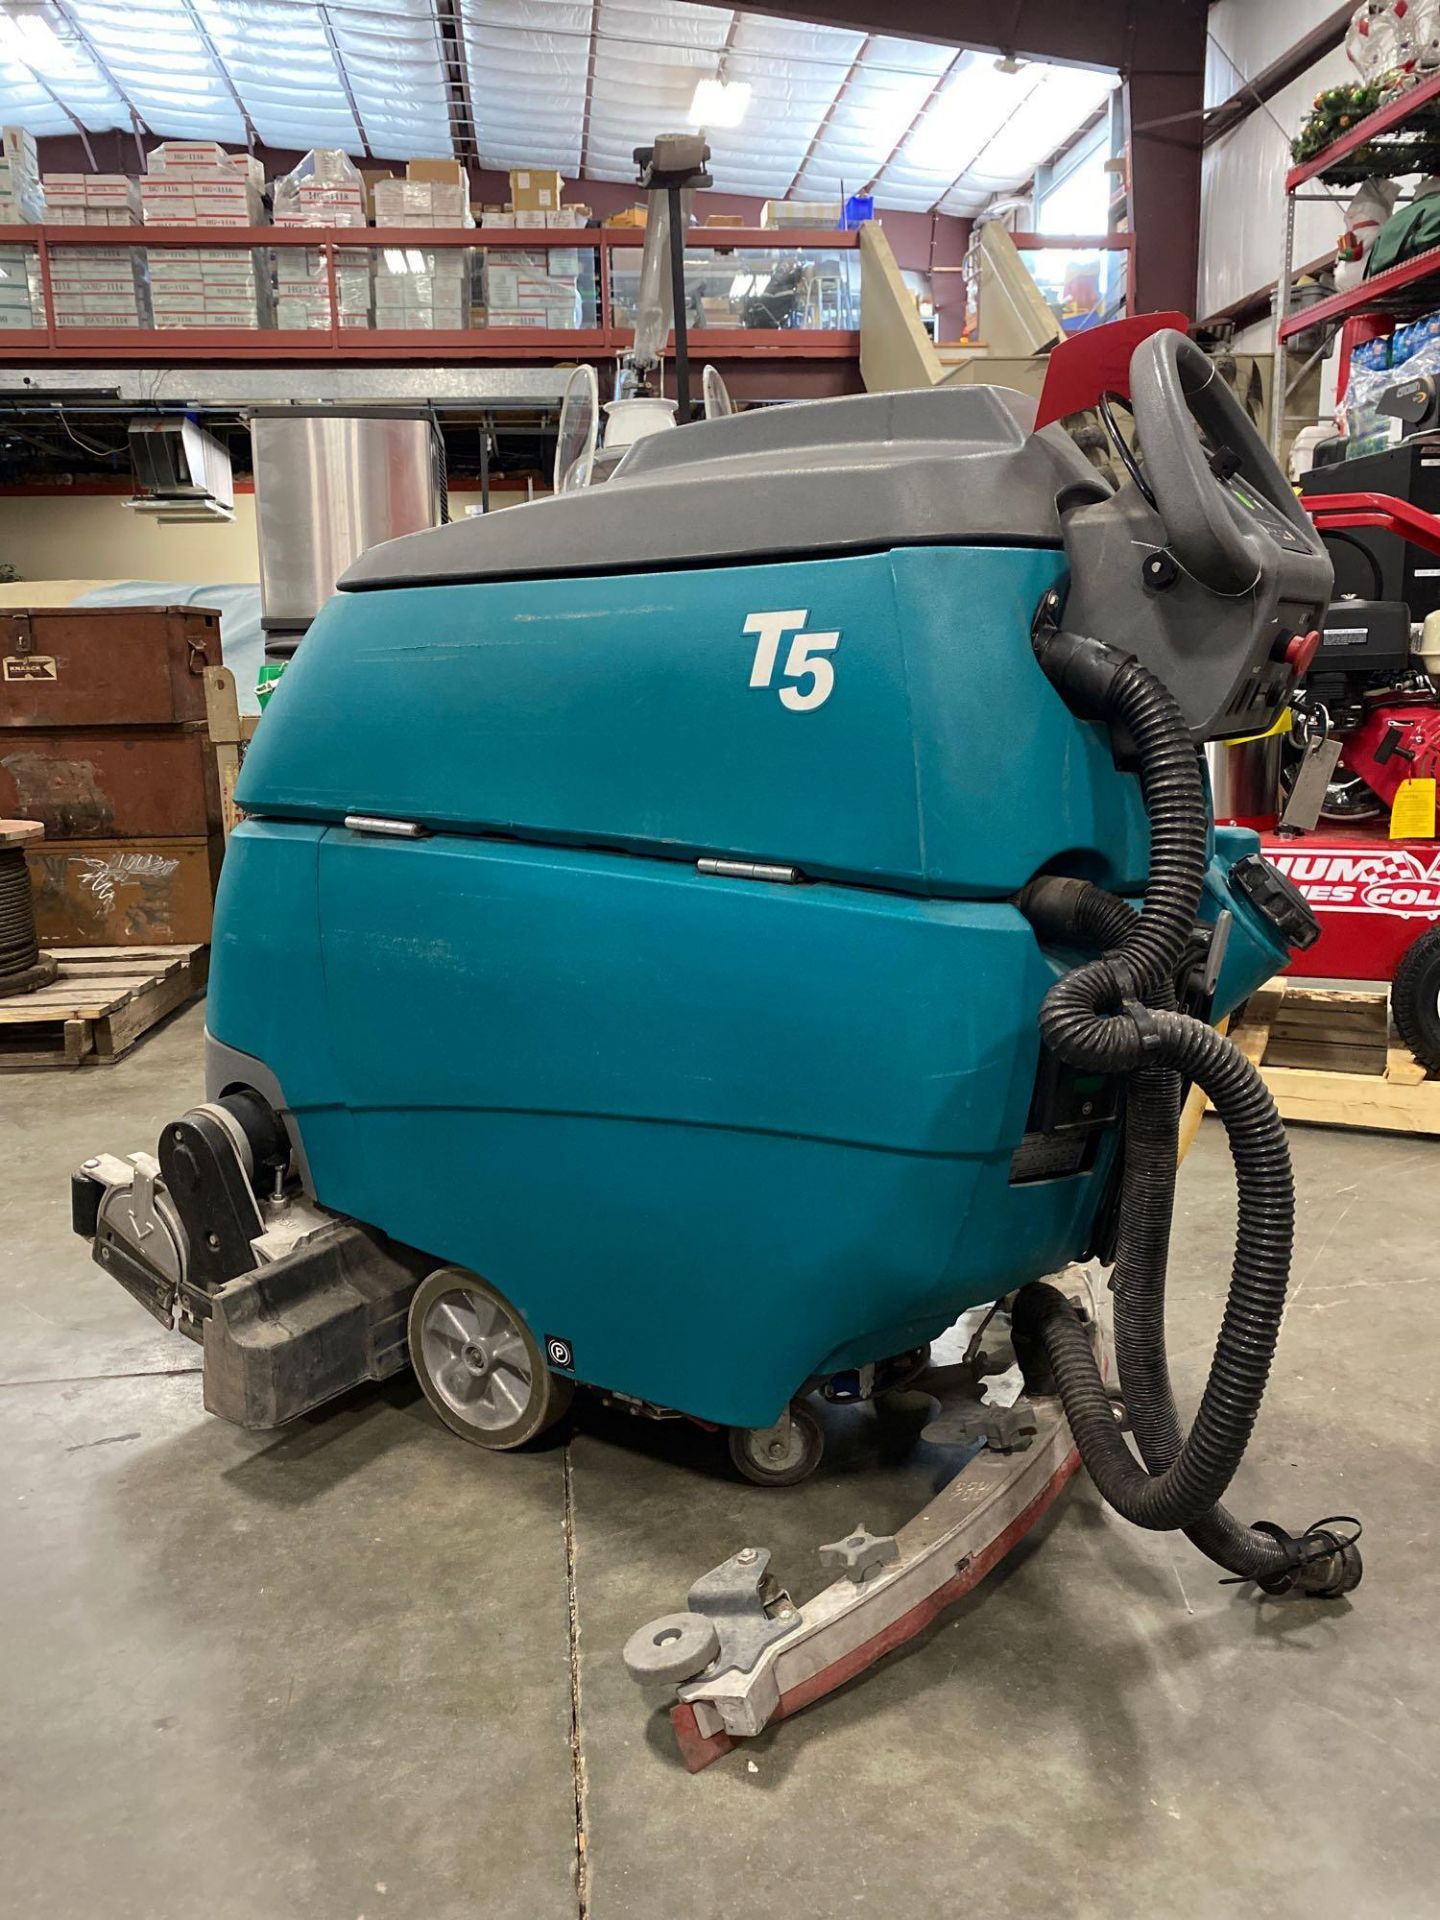 TENNANT T5 FLOOR SCRUBBER, BUILT IN BATTERY CHARGER, RUNS & OPERATES - Image 2 of 22